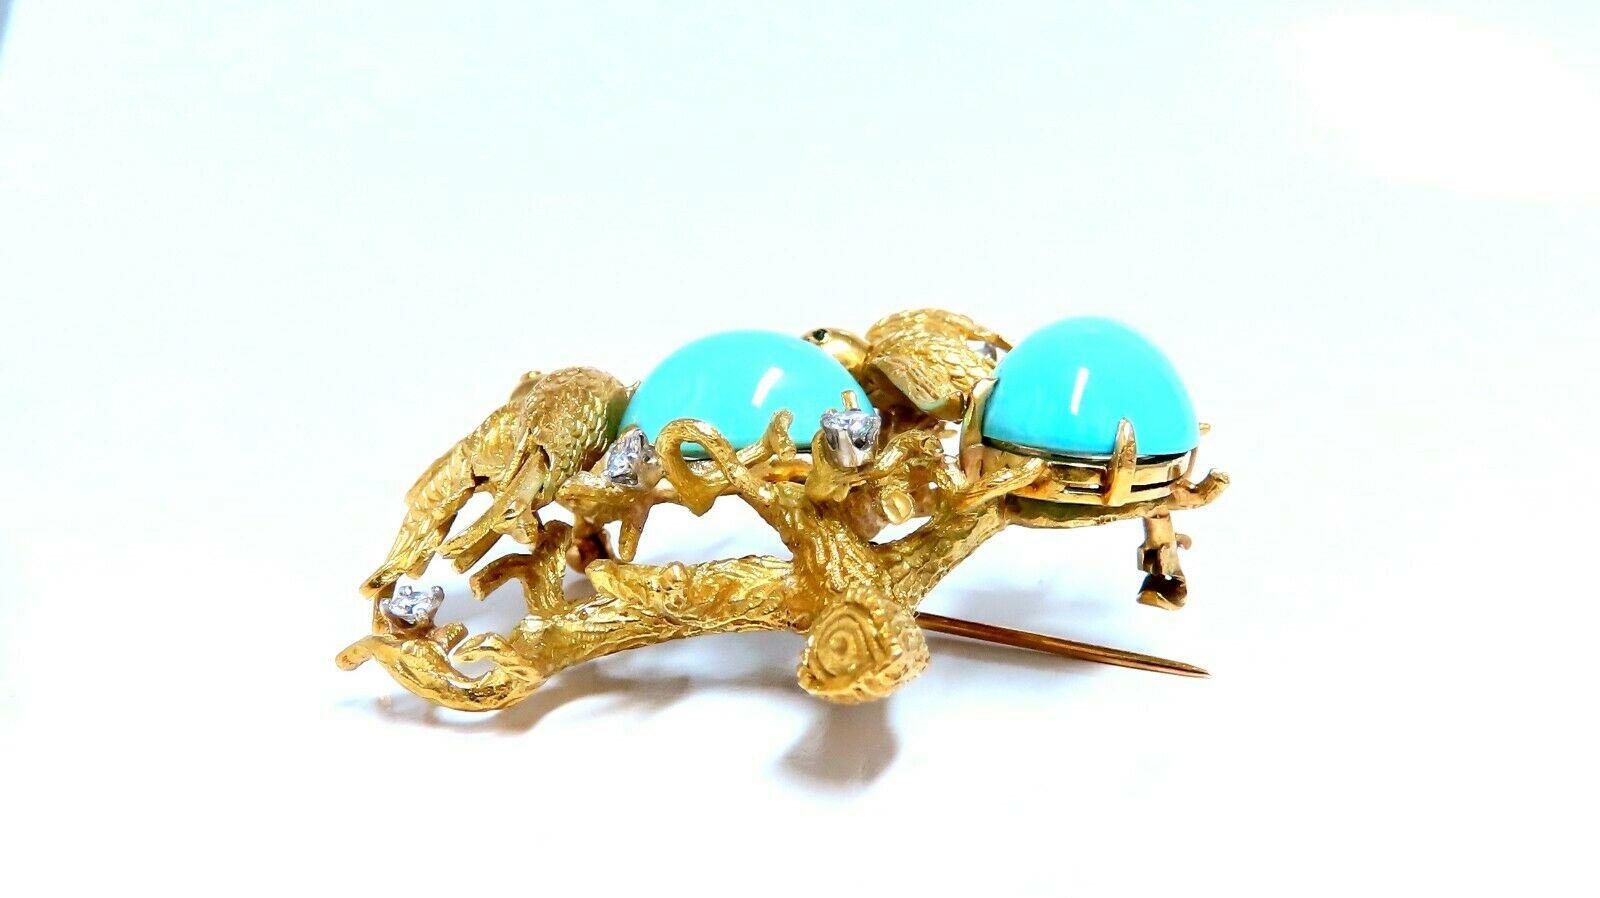 Vintage Bird Nest Eggs 20ct Turquoise 18kt Brooch High Intricate For Sale 2